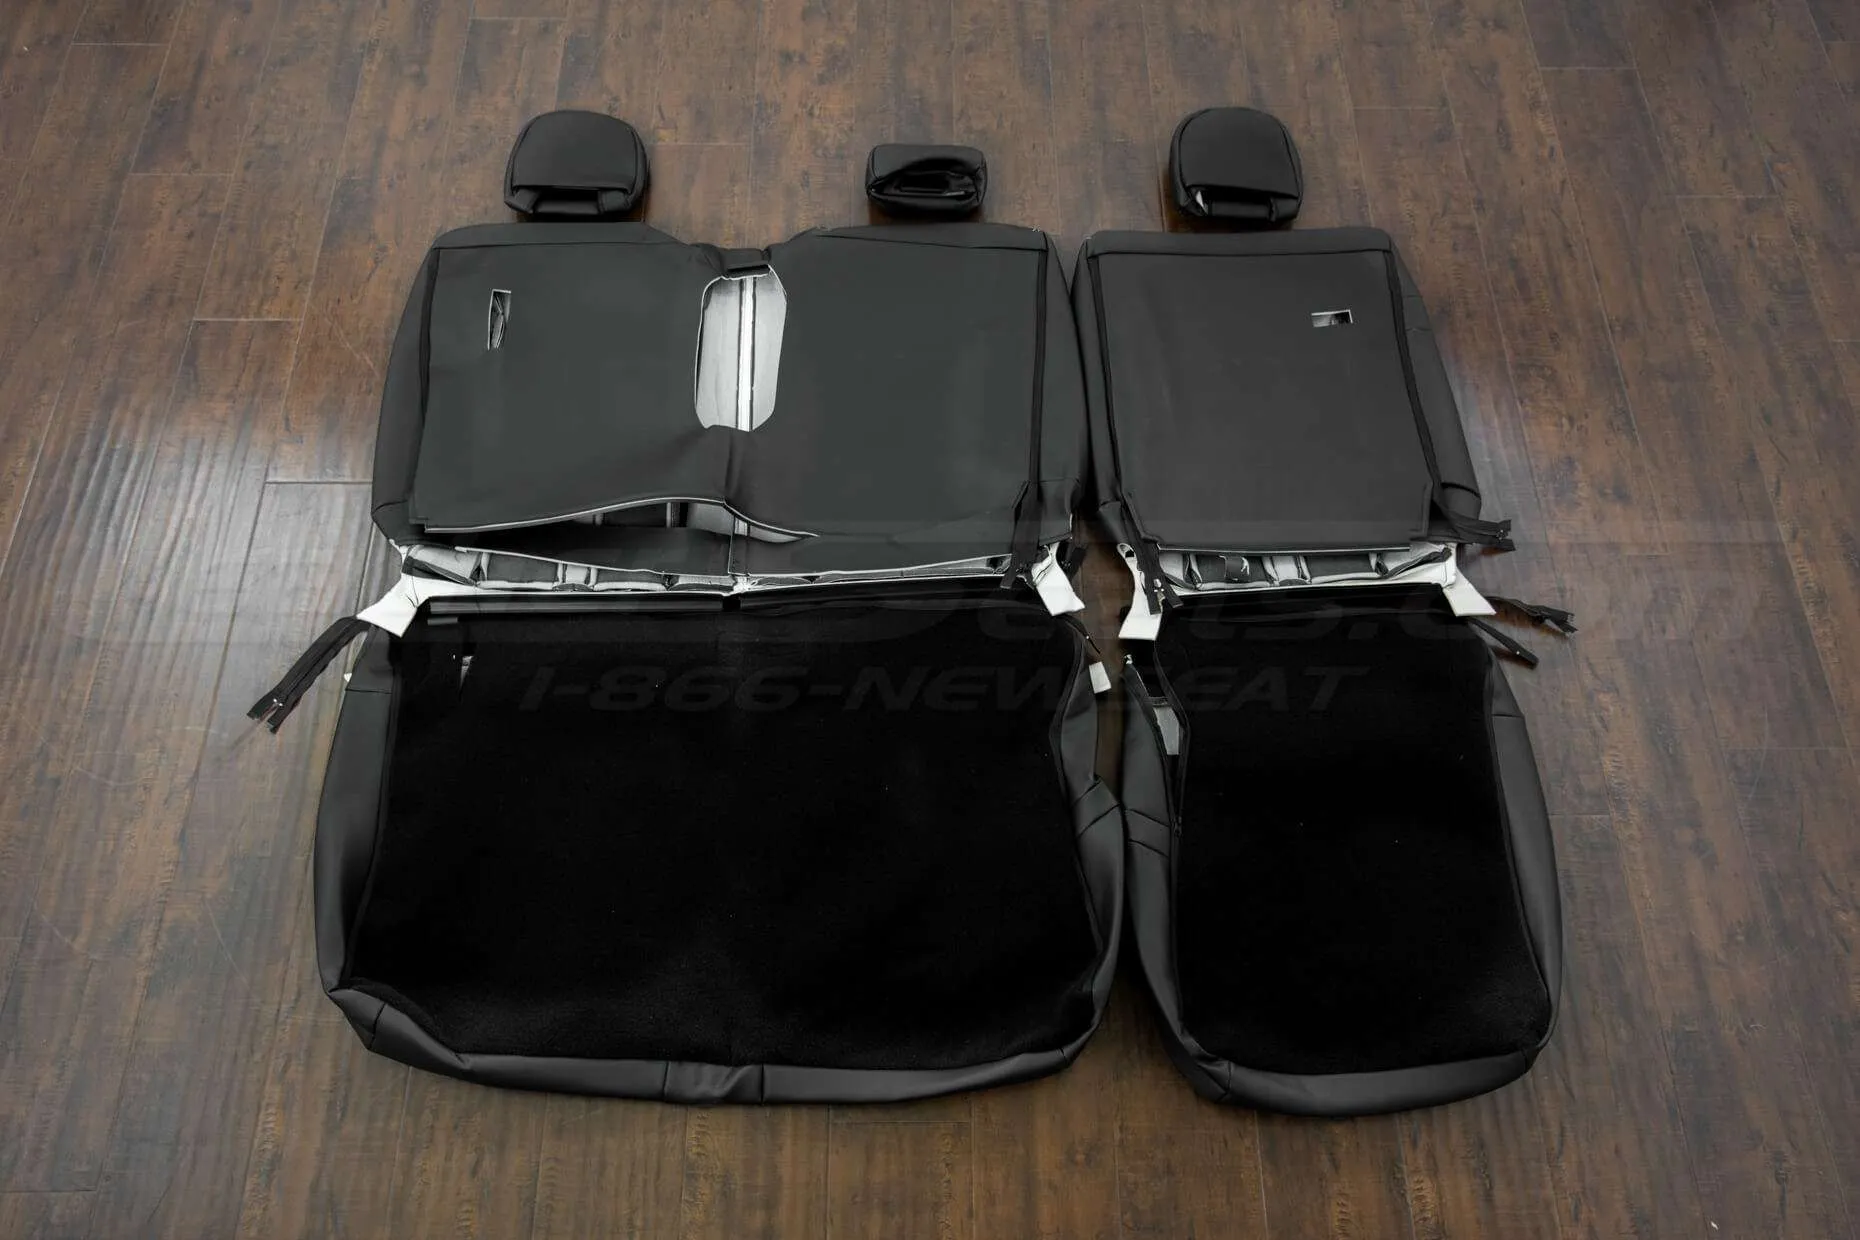 Ford F-150 Upholstery Kit - Black - Back view of rear seats